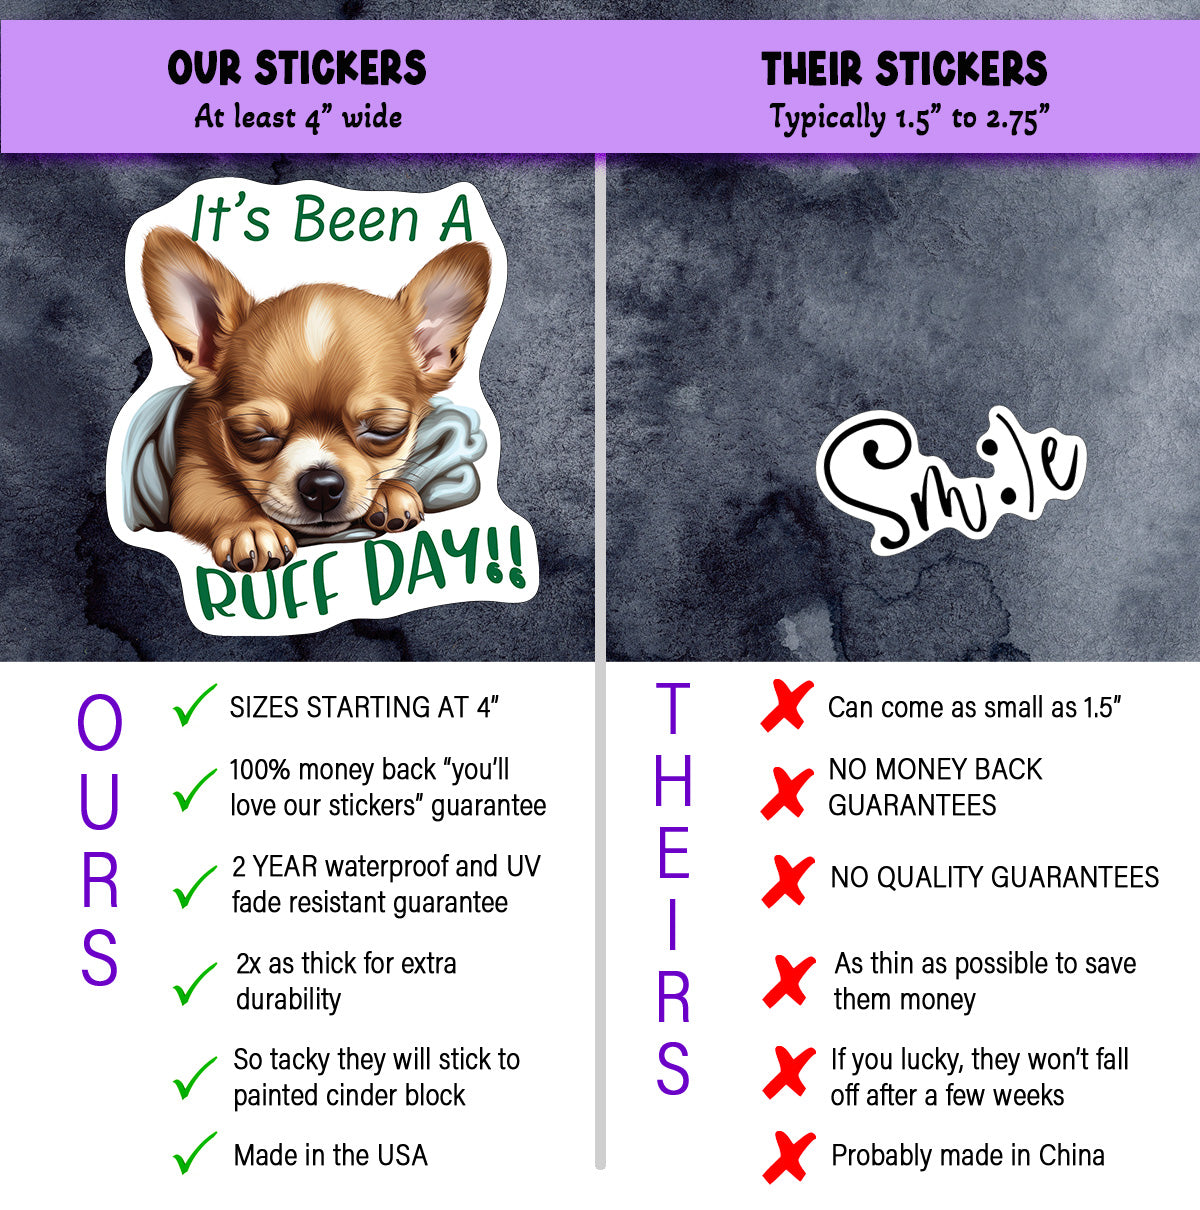 Chihuahua Stickers